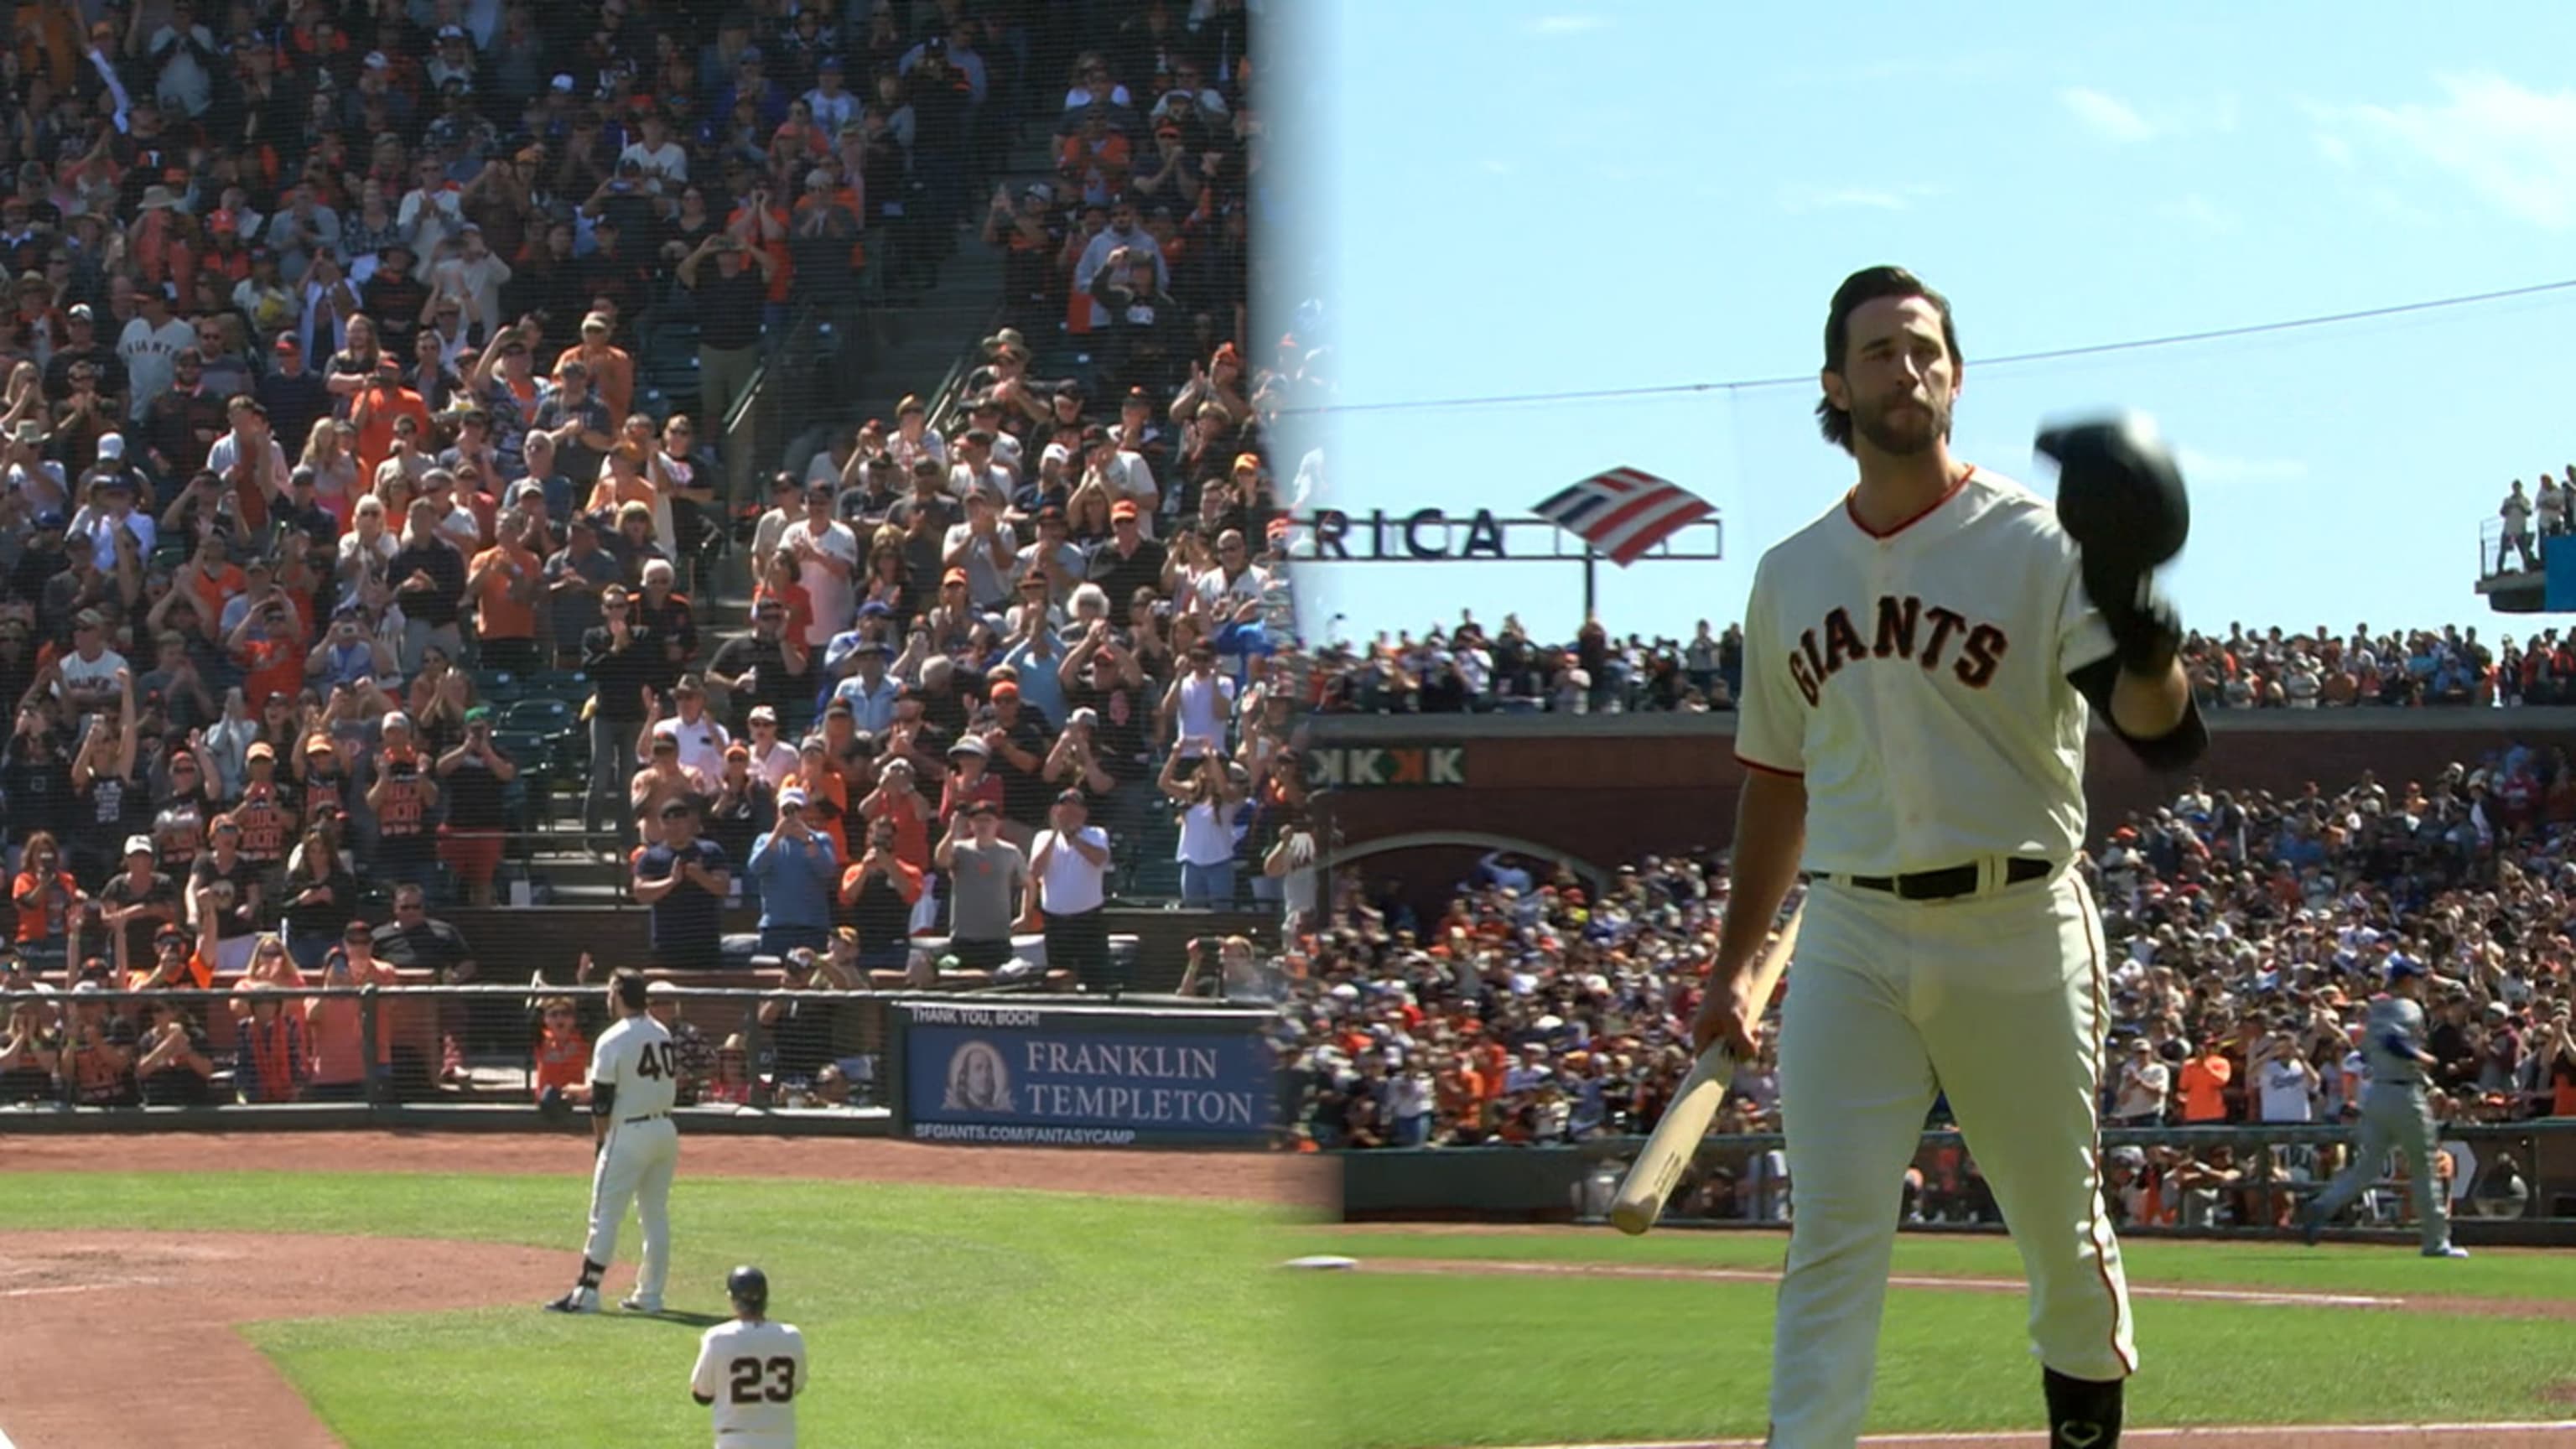 Where Madison Bumgarner stands now compared to previous springs